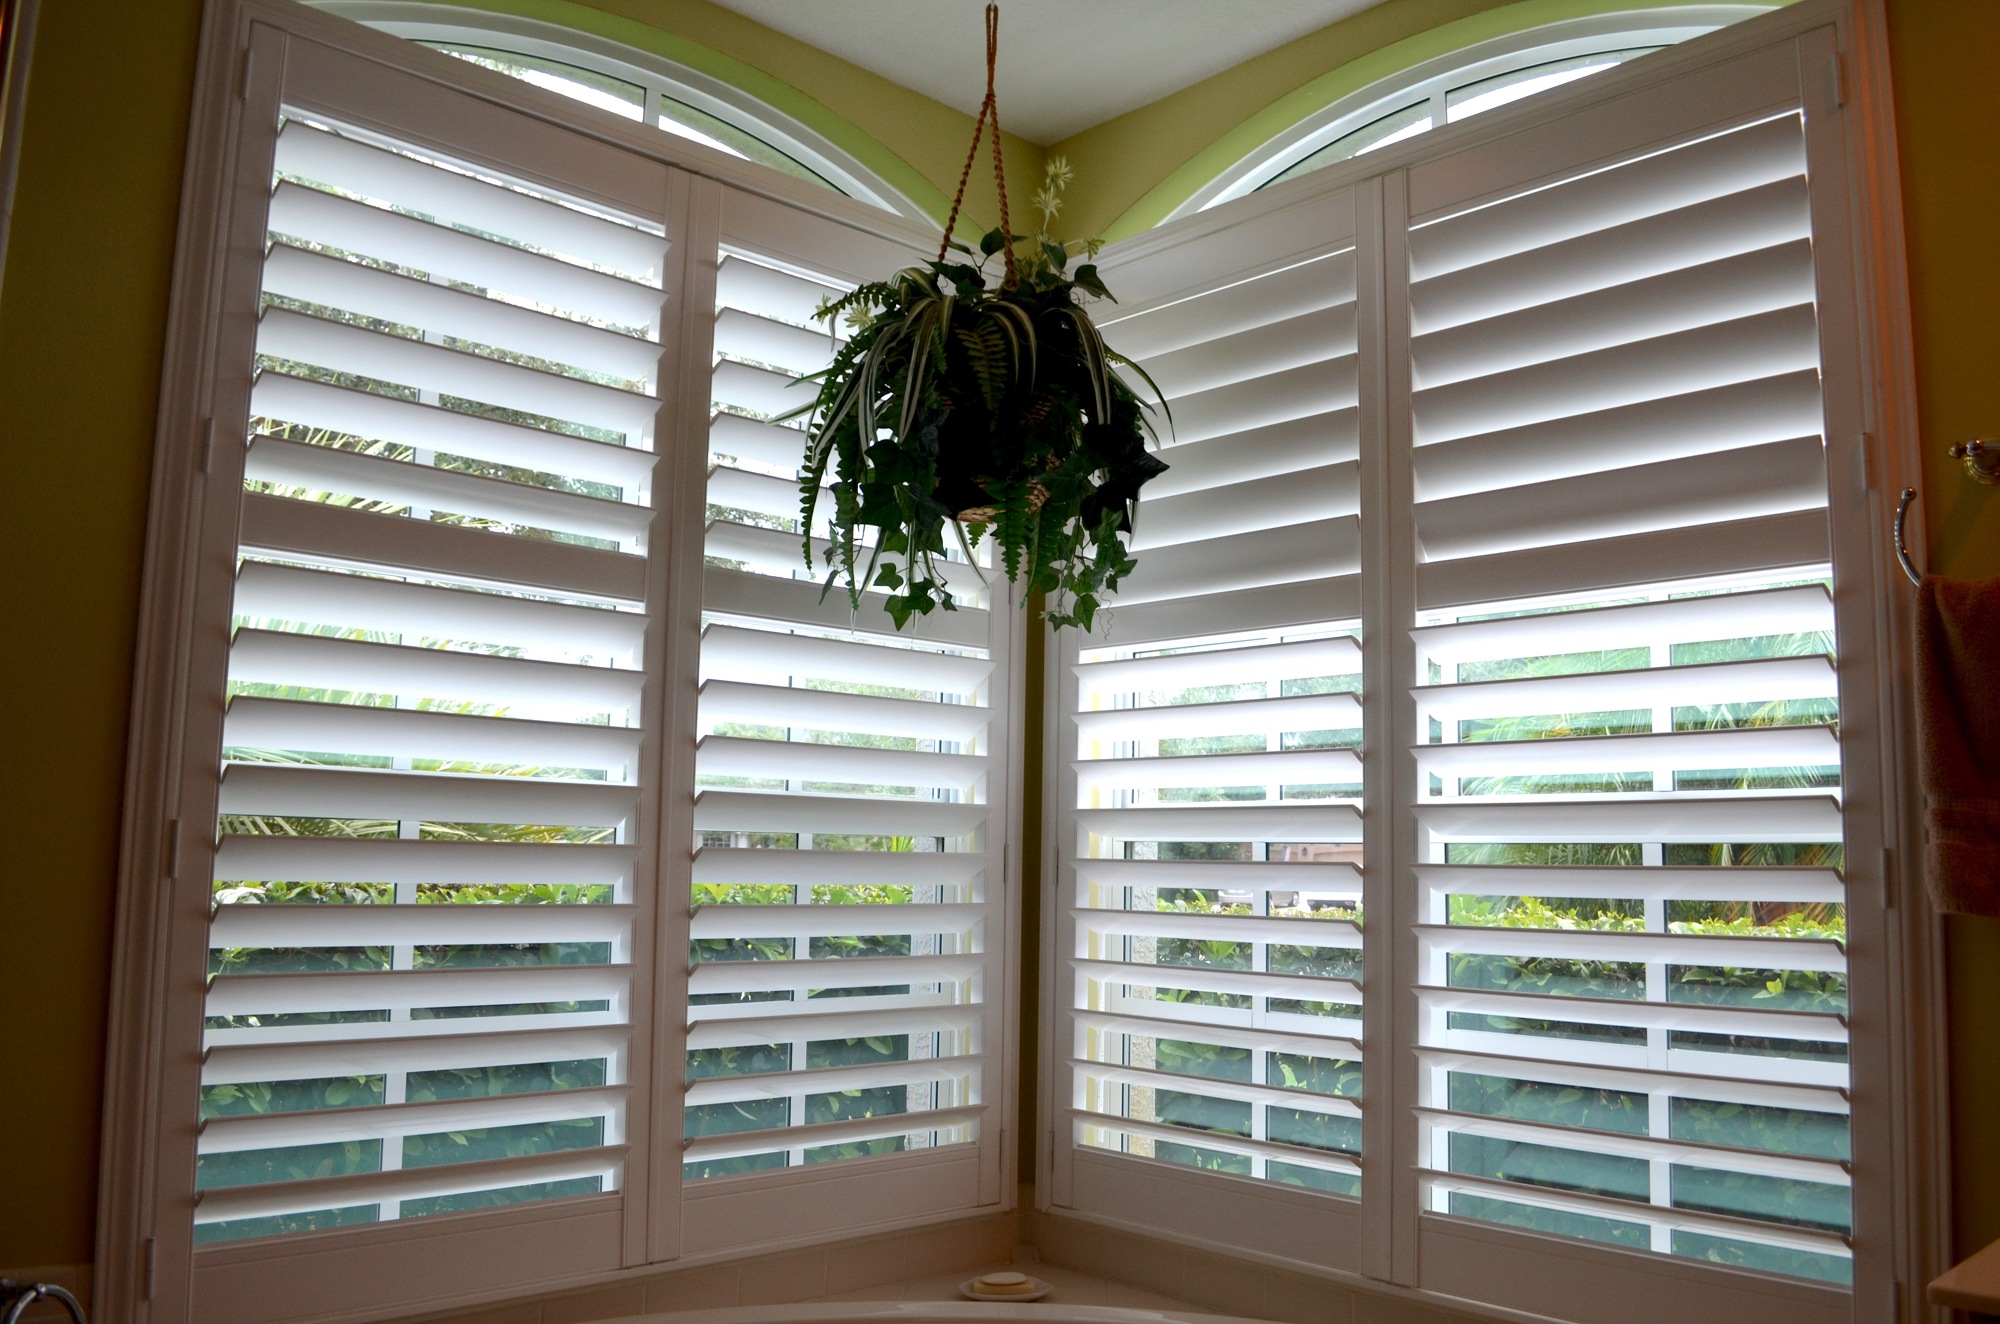 Hurricane proof glass alleviates the need for shutters, but can be a costly option. The O'Briens spent more than $4,000 on two hurricane glass windows in their bathroom.